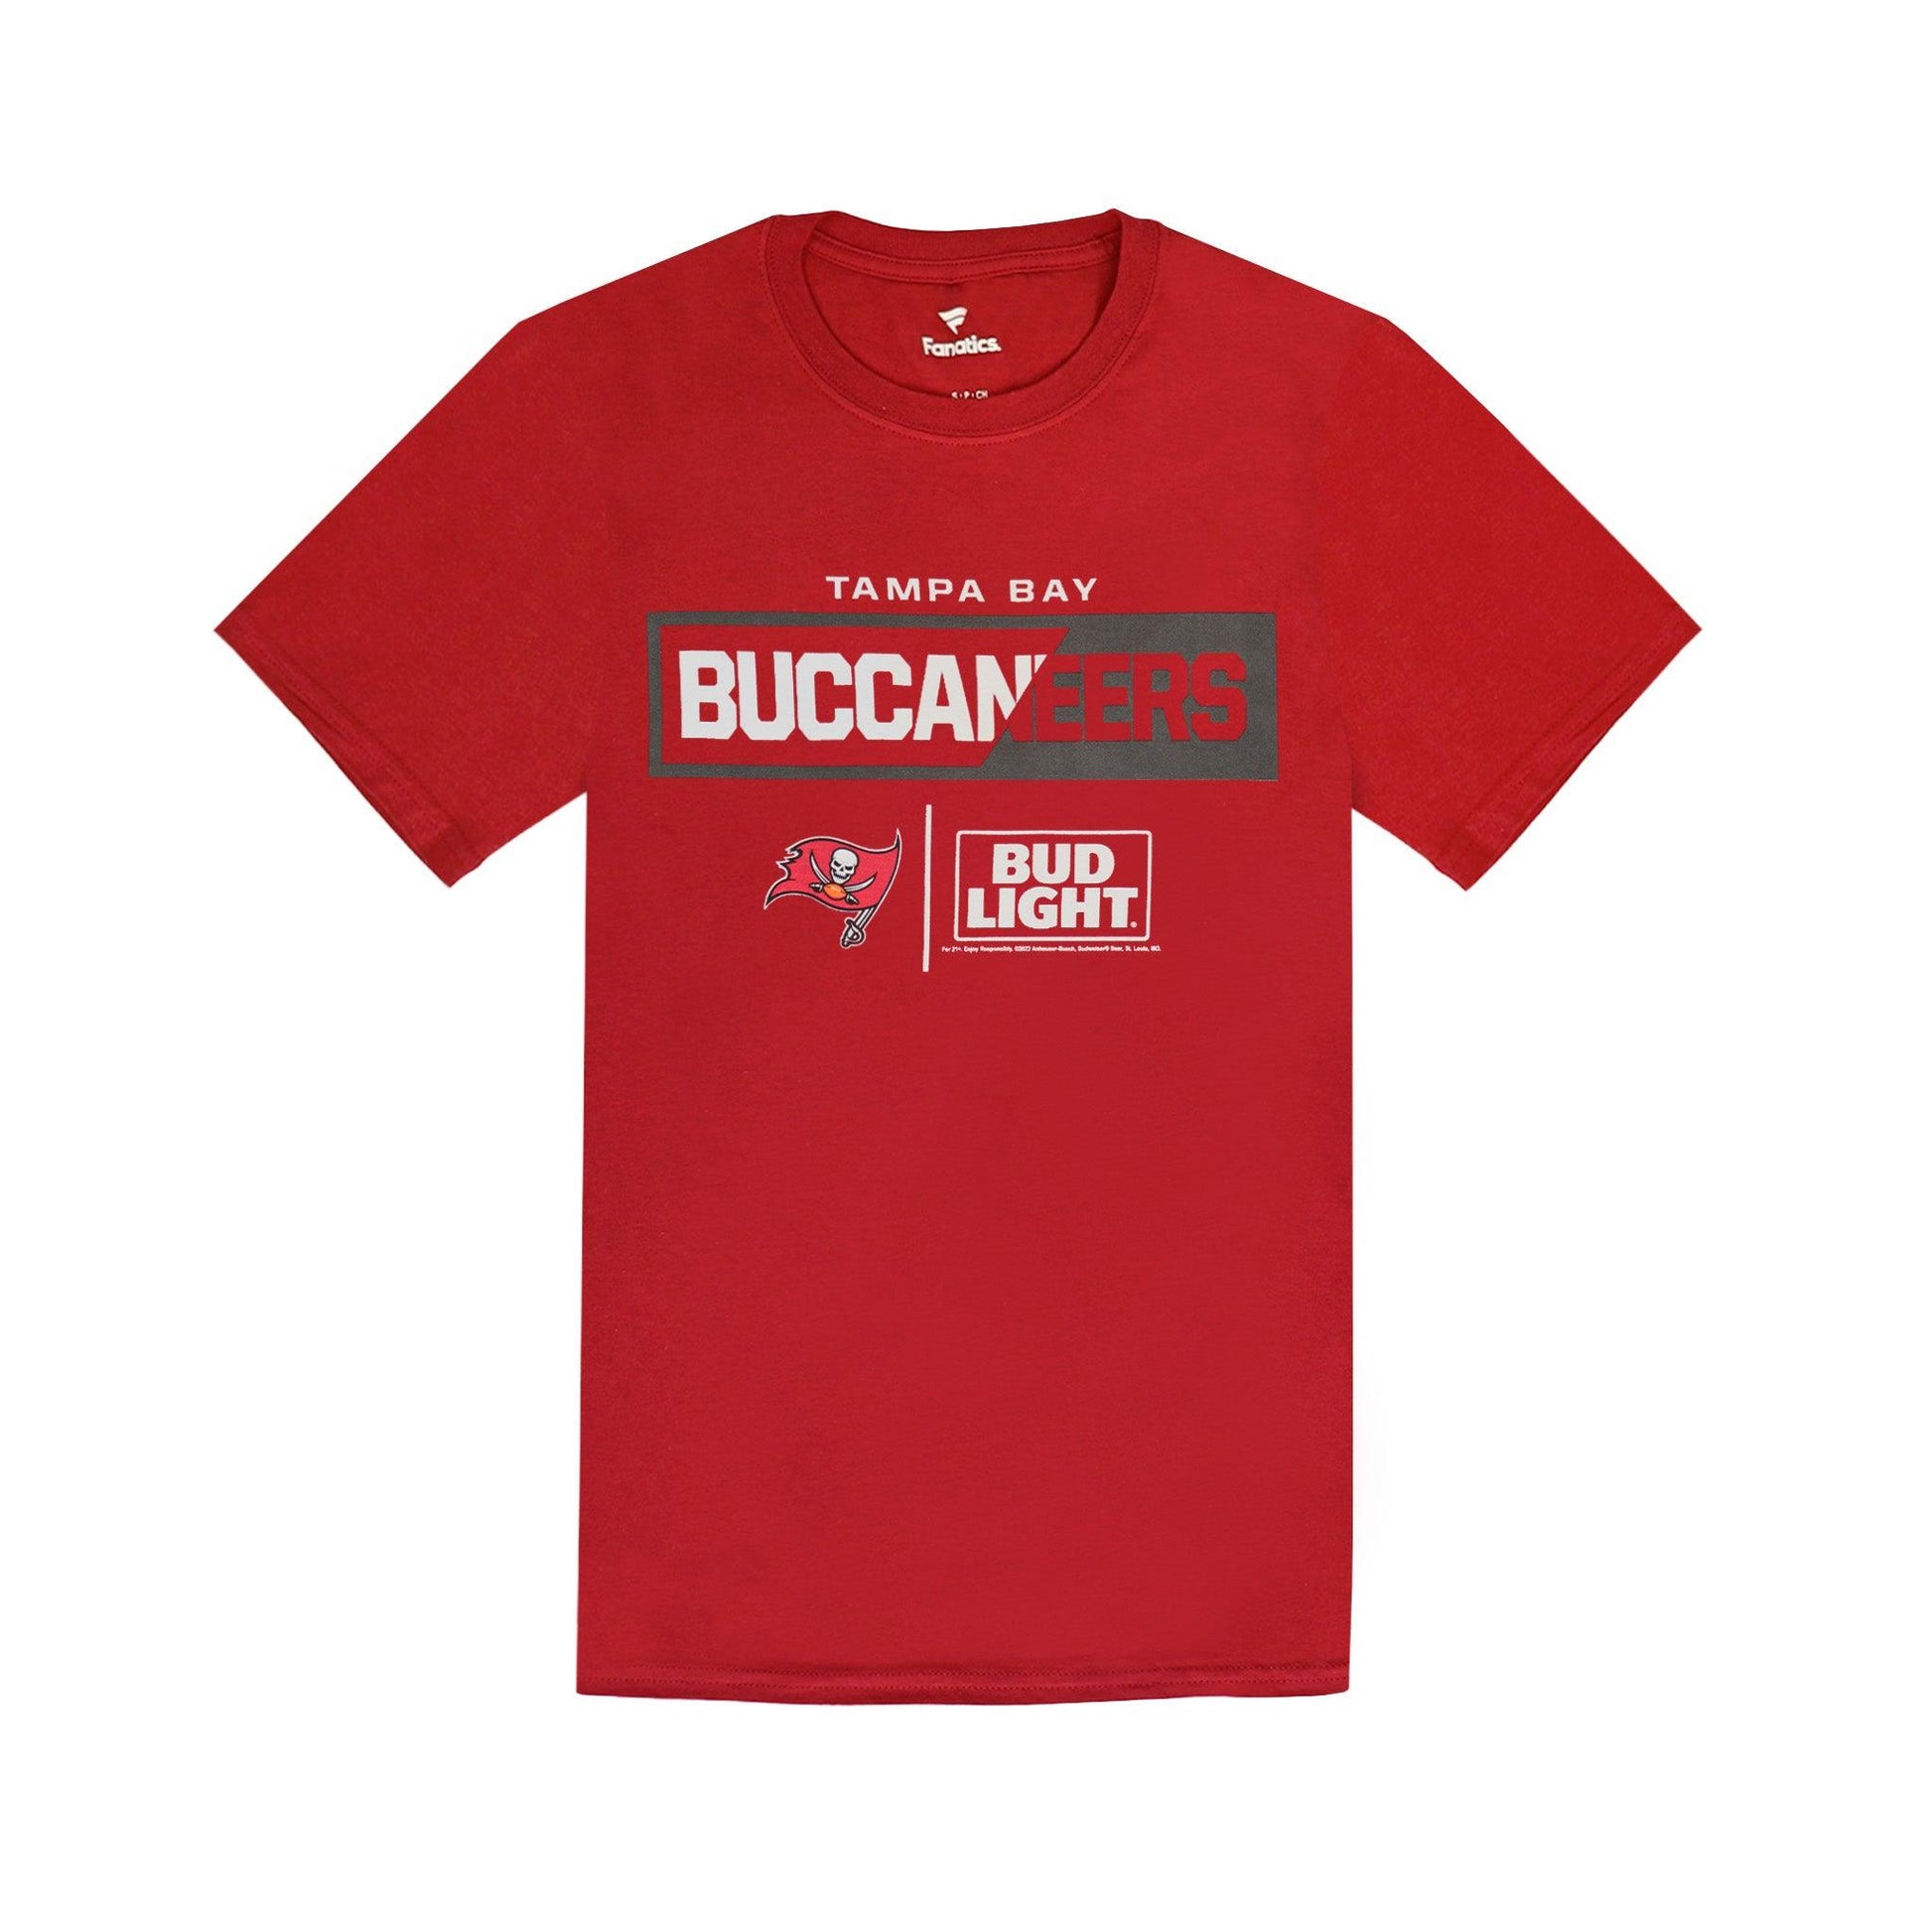 front of red shirt with bucs and bud light logo